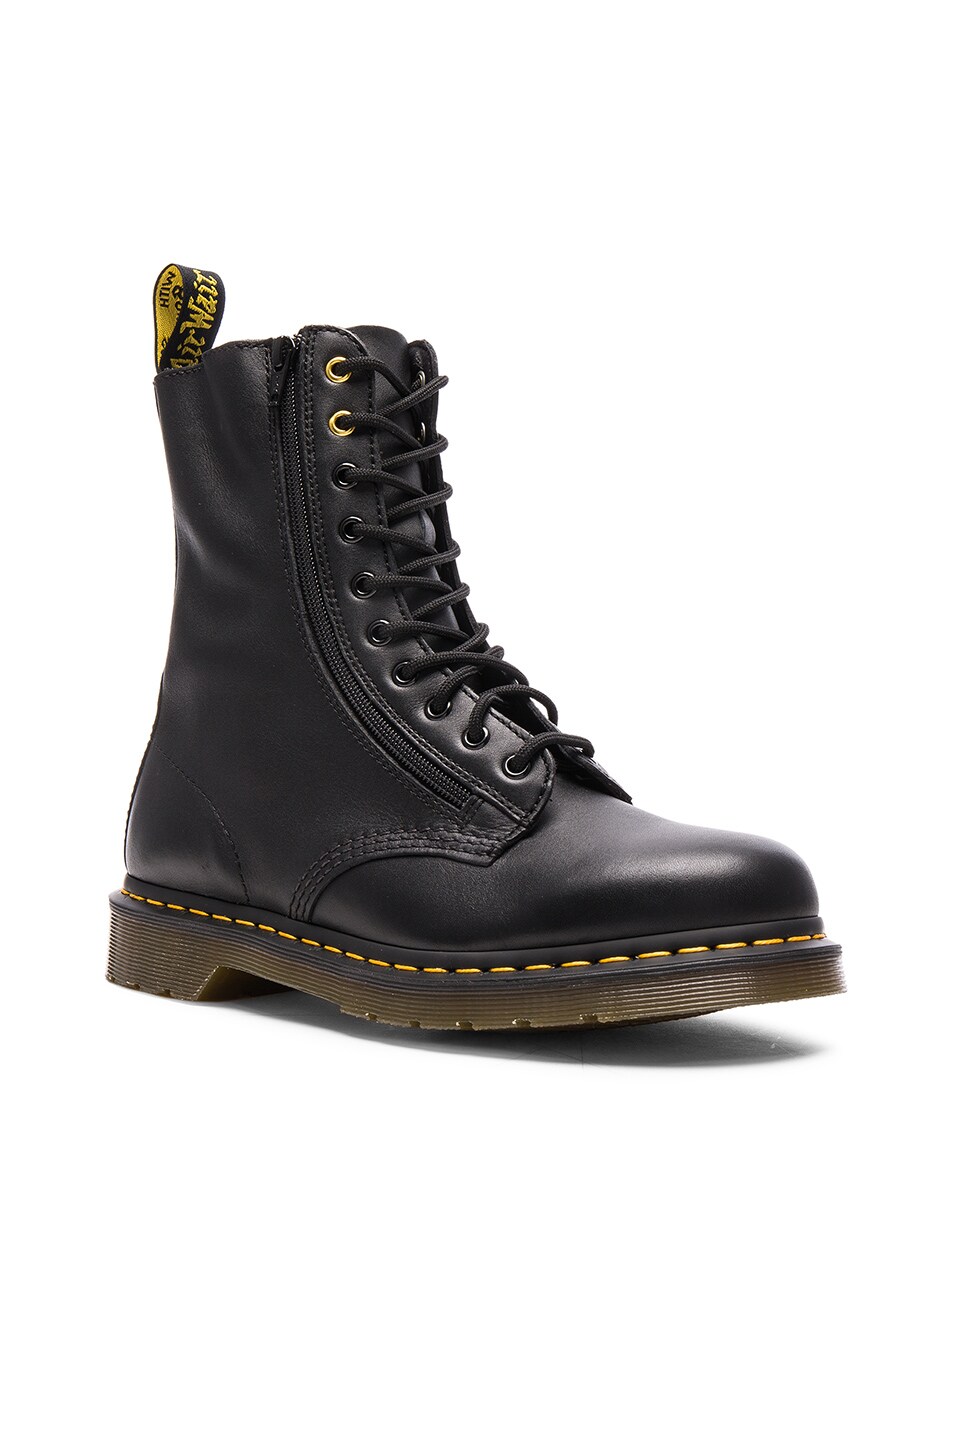 Image 1 of Yohji Yamamoto x Dr. Martens Oiled Leather Zip Boots in Black